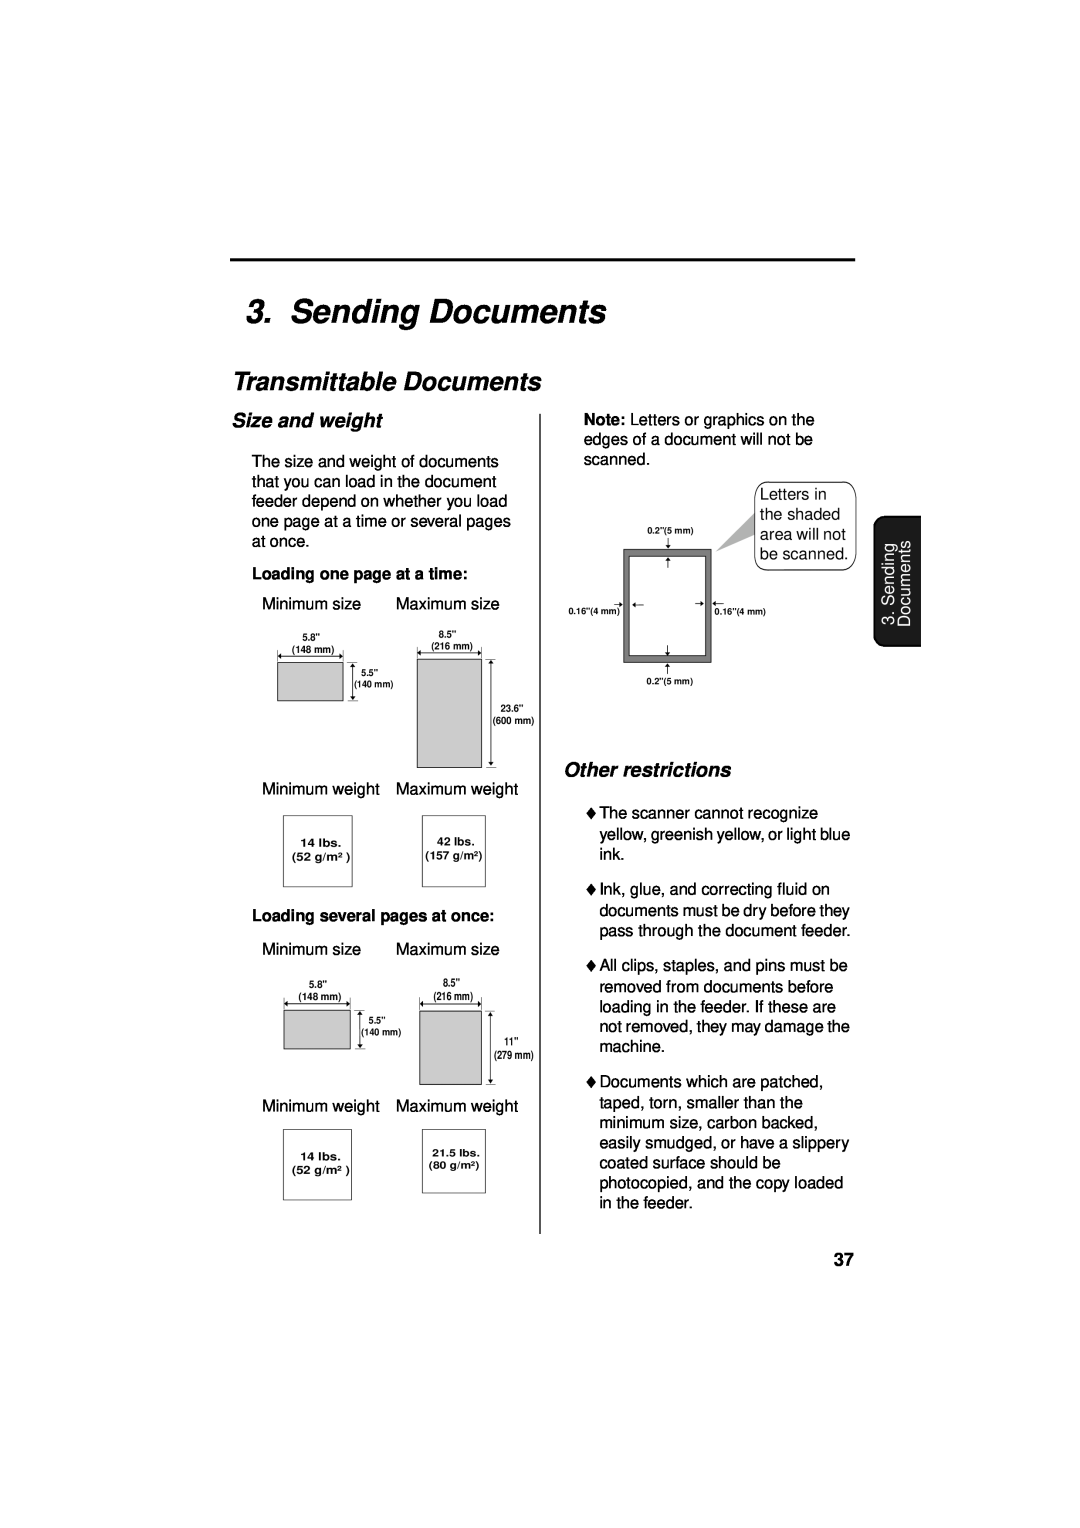 Sharp UX-340LM Sending Documents, Transmittable Documents, Size and weight, Other restrictions, Loading one page at a time 